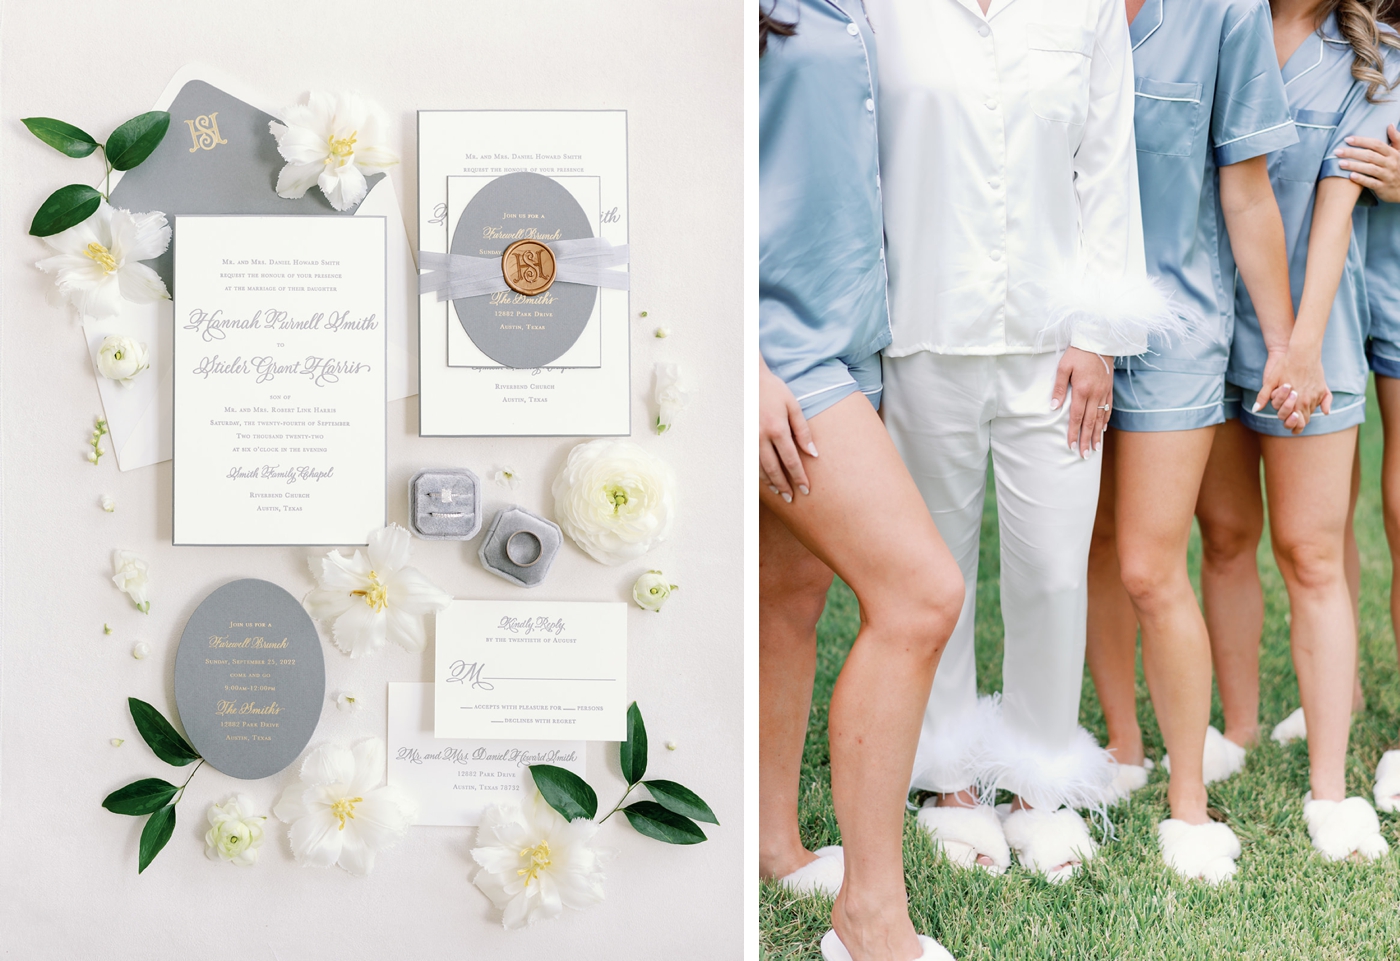 Gray and white wedding invitation flatlay with fresh flowers